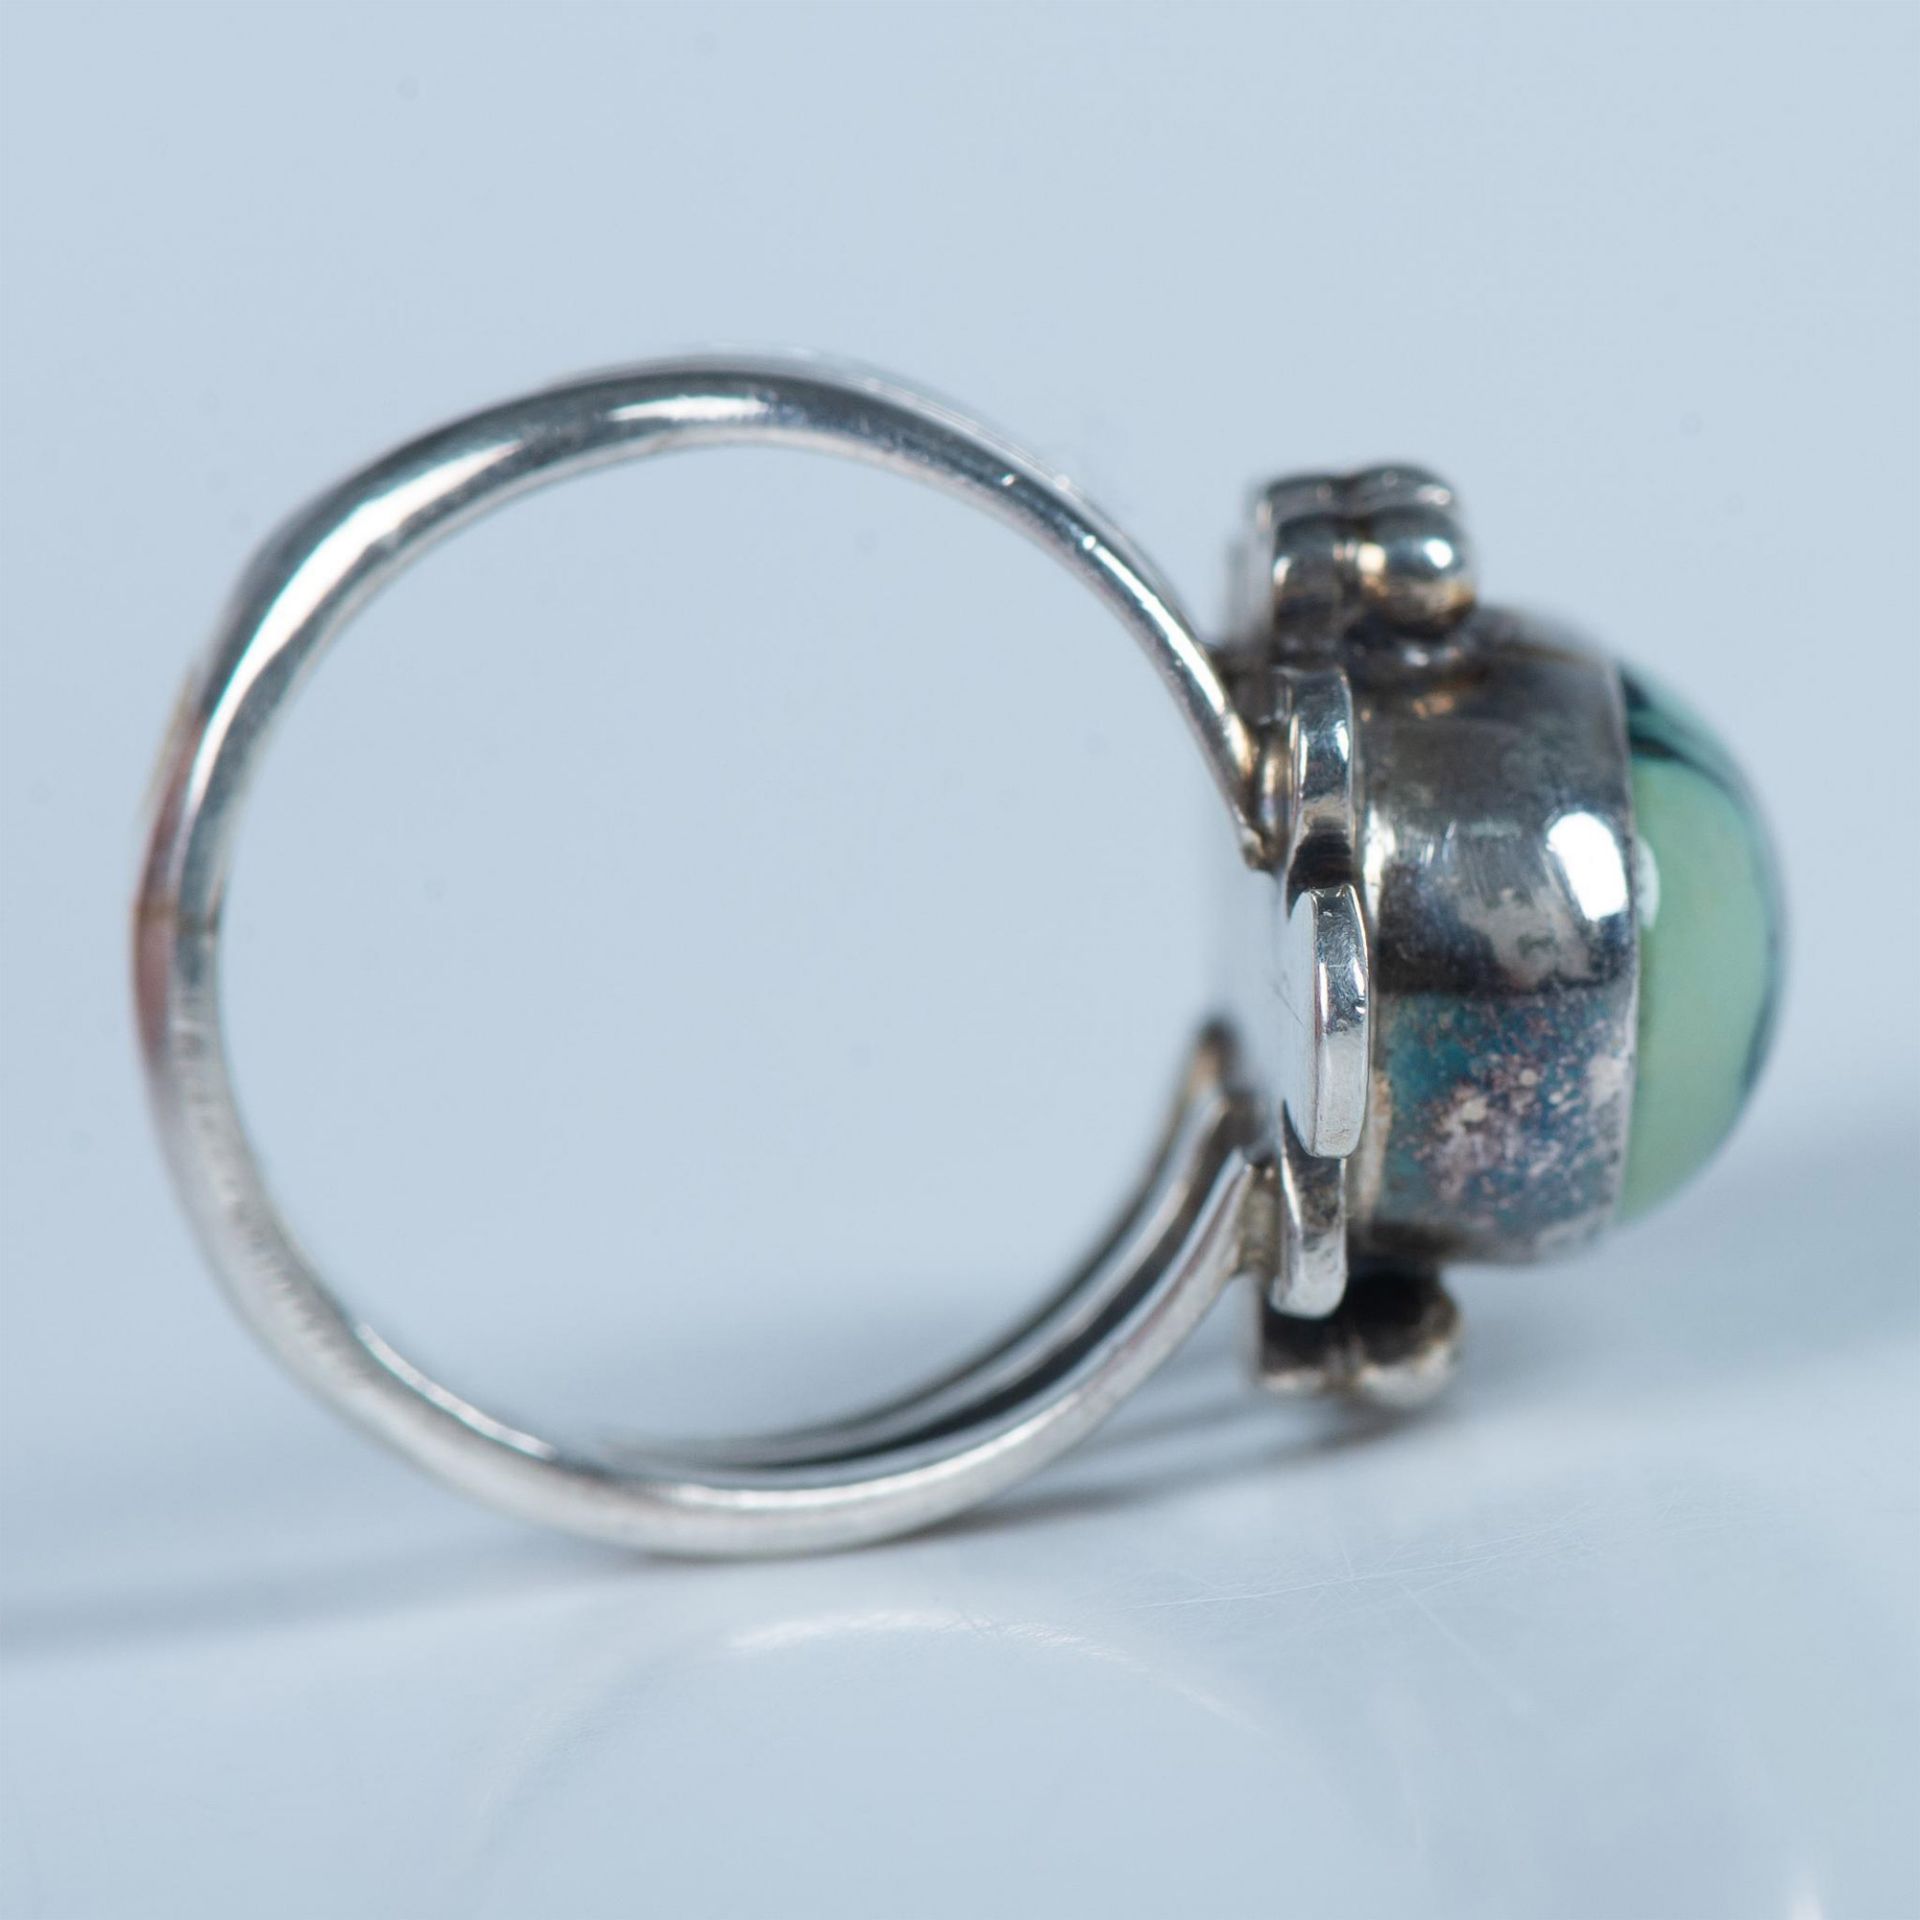 Handmade Native American Sterling Silver & Turquoise Ring - Image 5 of 5